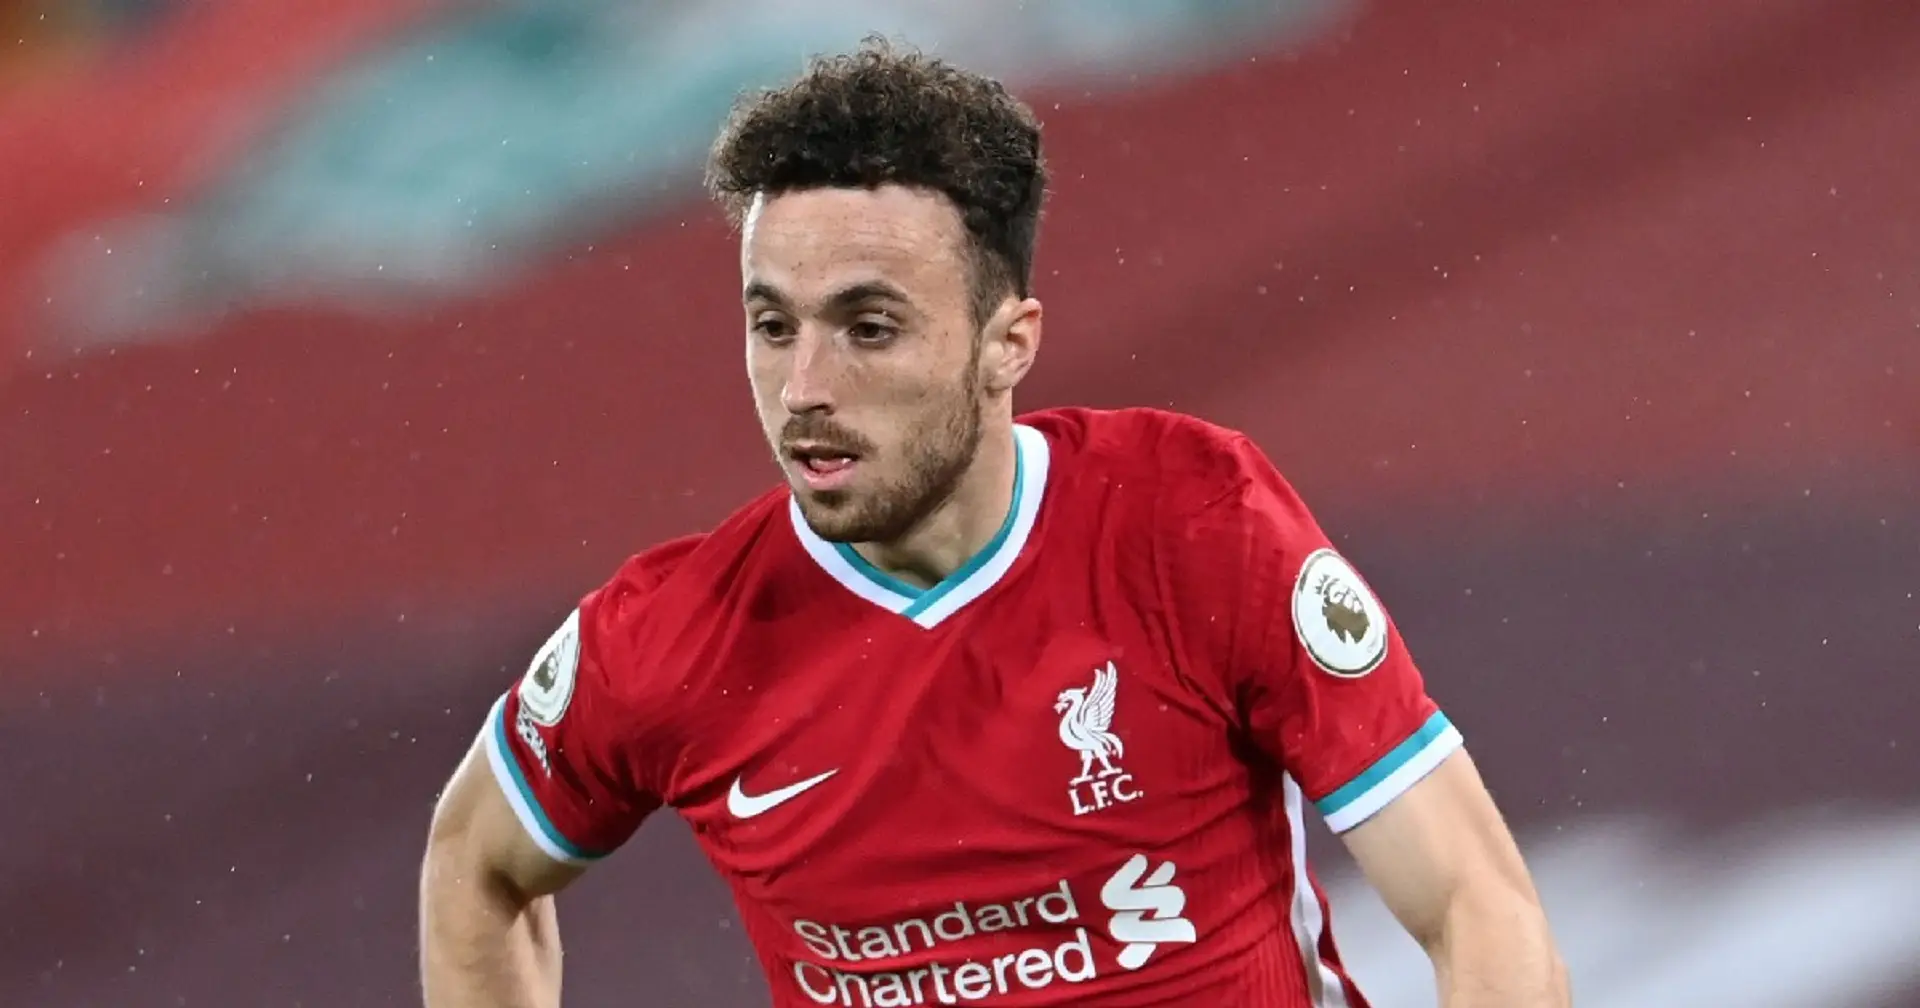 'The hardest thing is not to arrive but to stay': Jota outlines Liverpool target as winger continues injury recovery